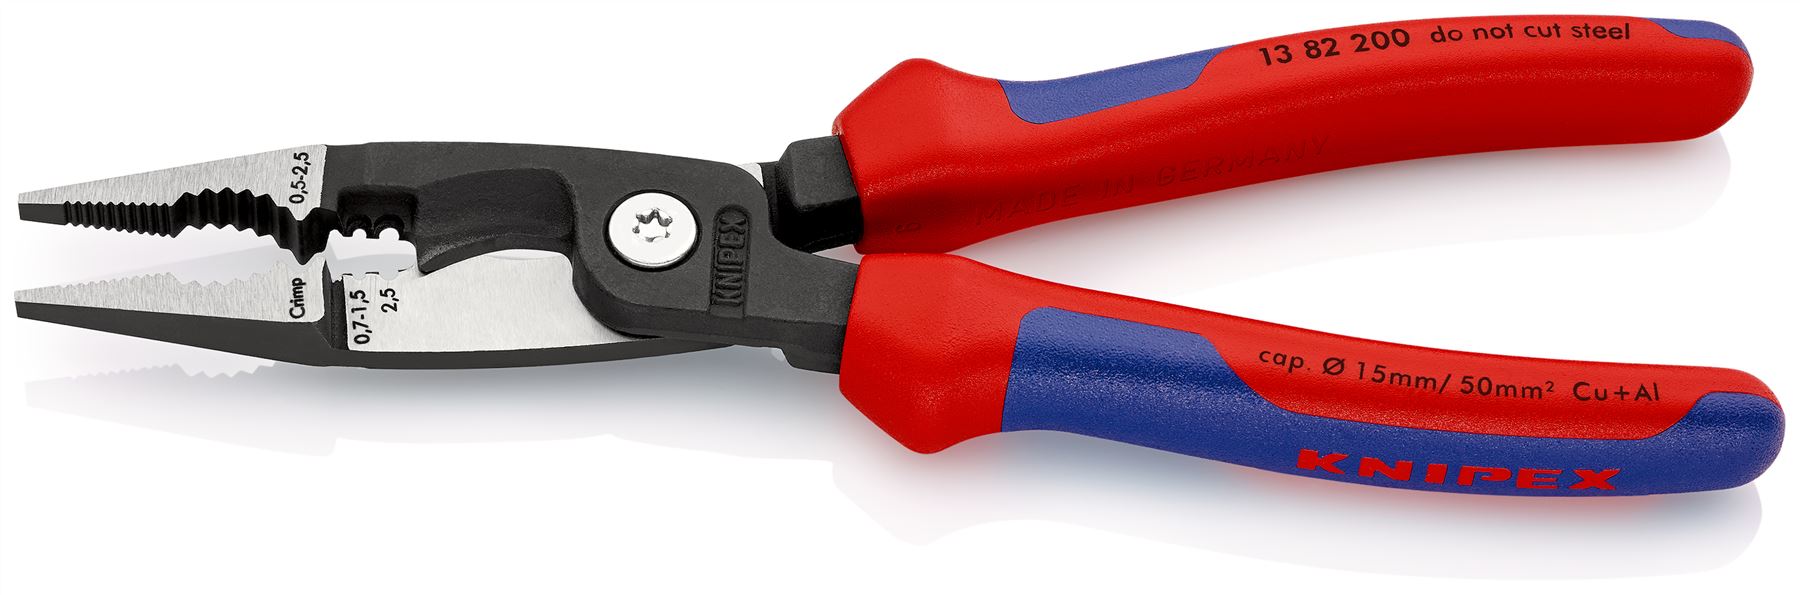 KNIPEX Pliers for Electrical Installation 200mm Multi Component Grips 13 82 200